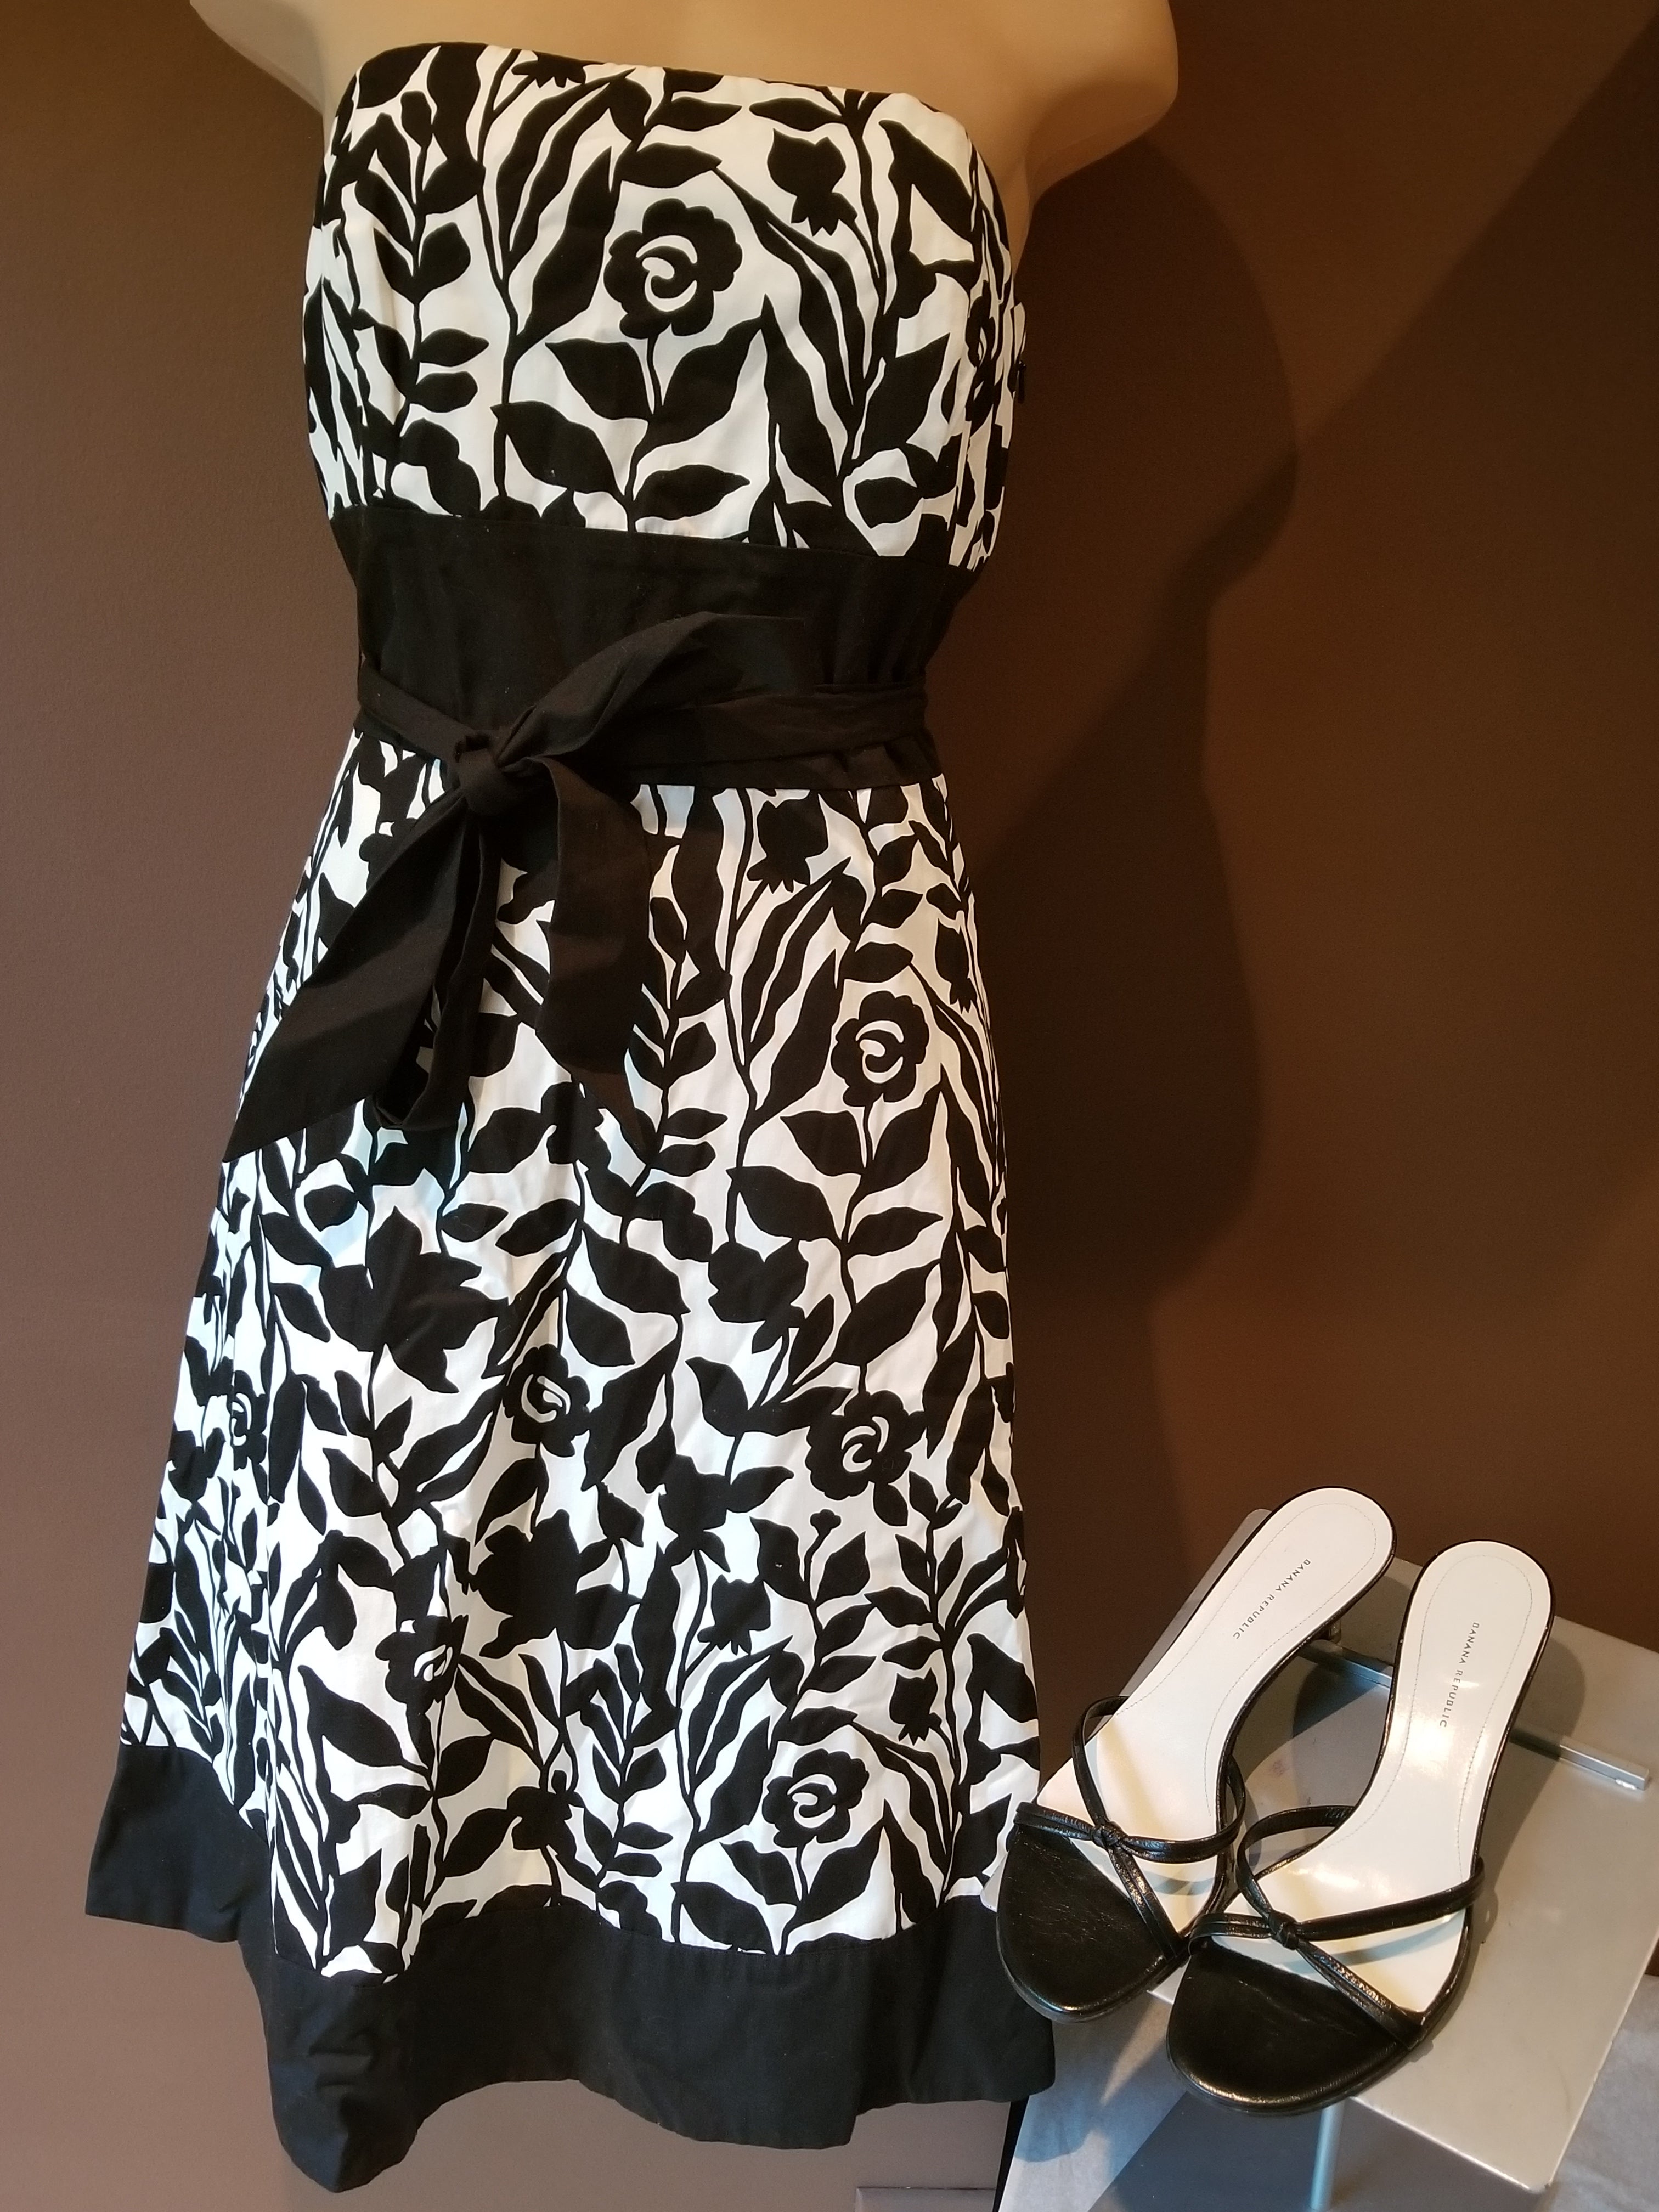 white and black floral dress